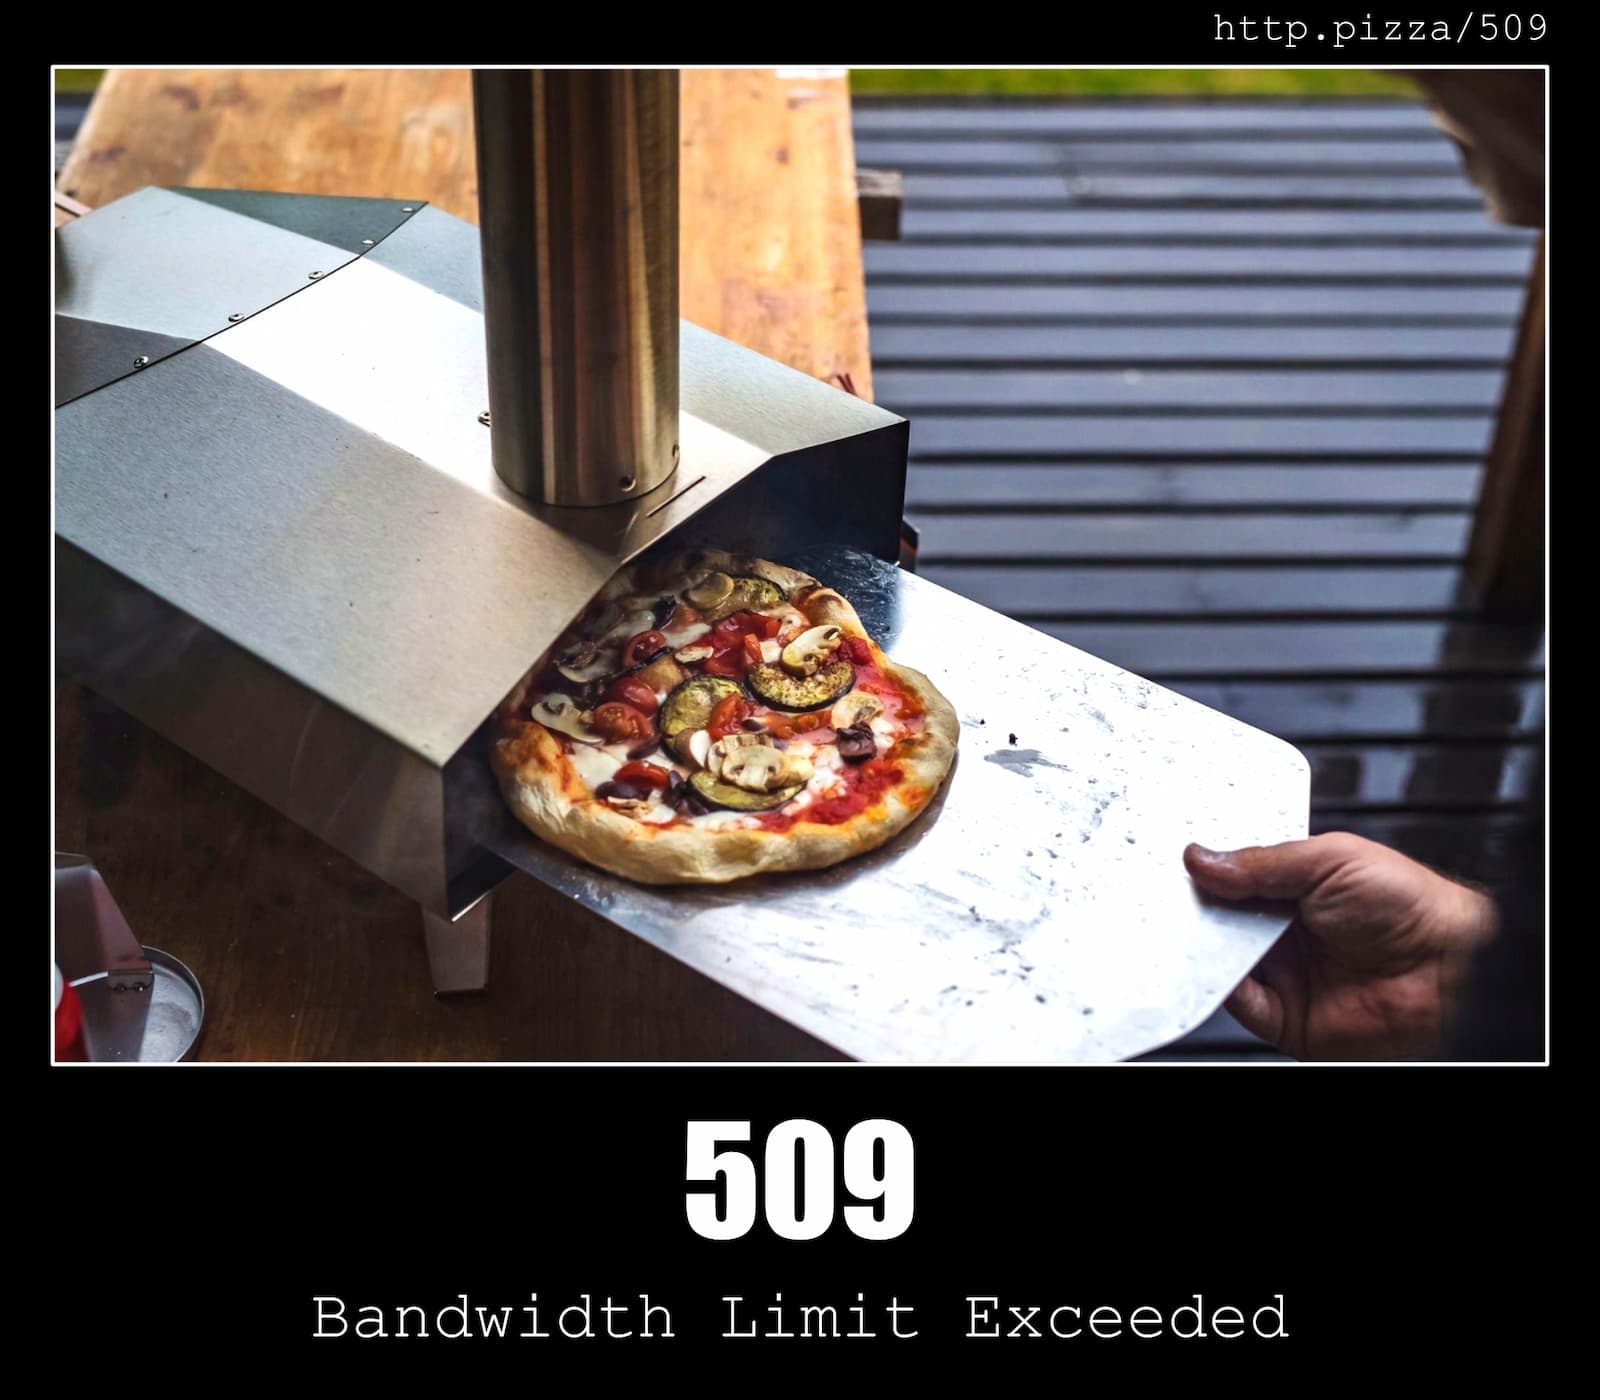 HTTP Status Code 509 Bandwidth Limit Exceeded & Pizzas